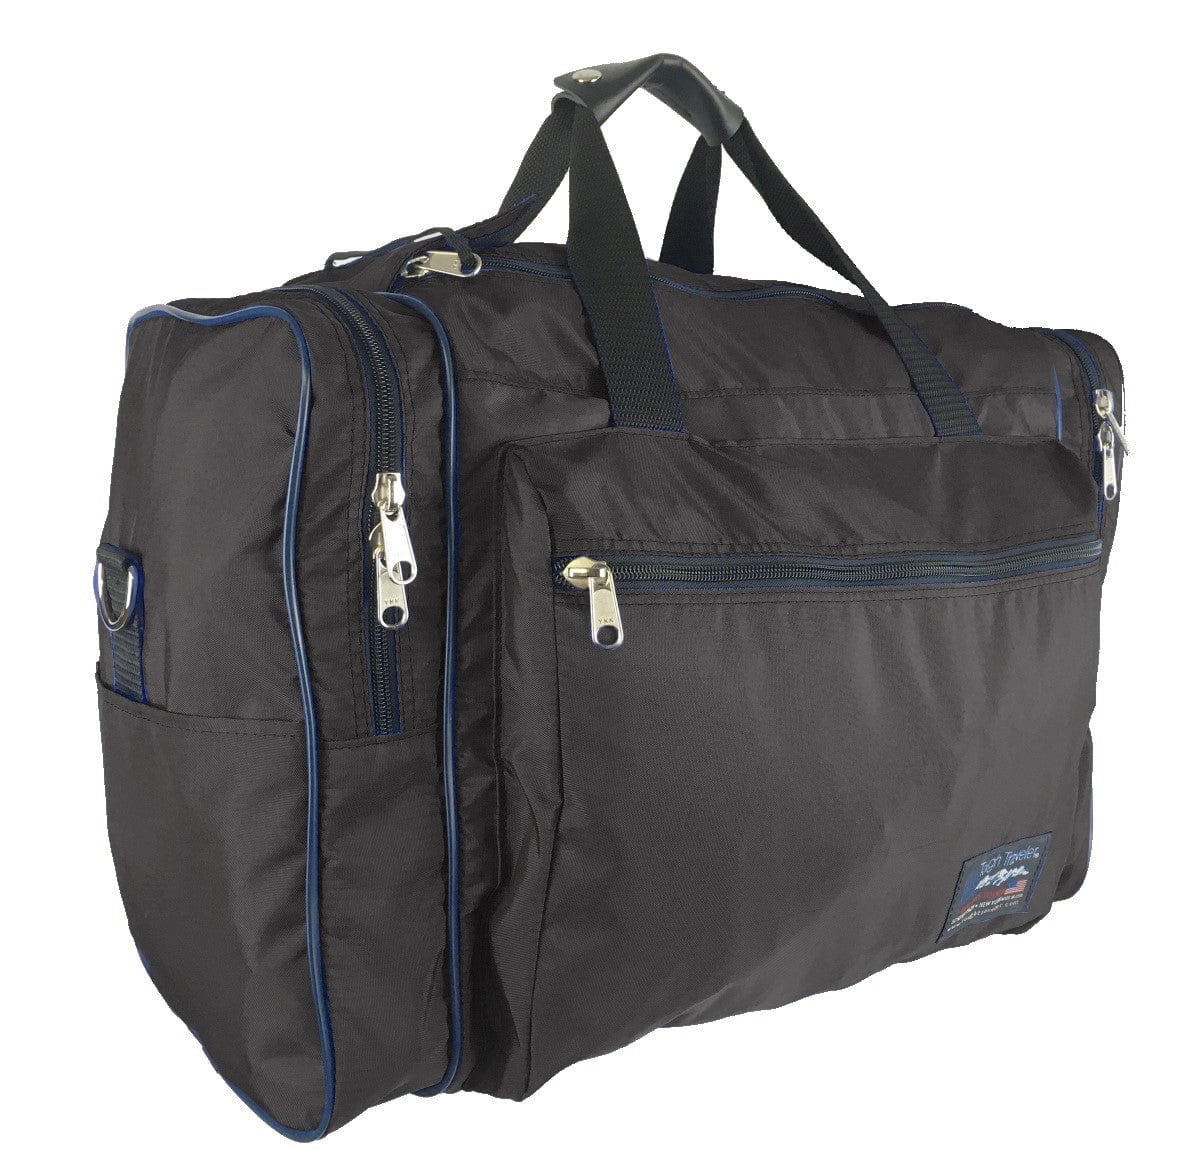 Made in USA SPORTS-D DUFFEL Carry-on Luggage